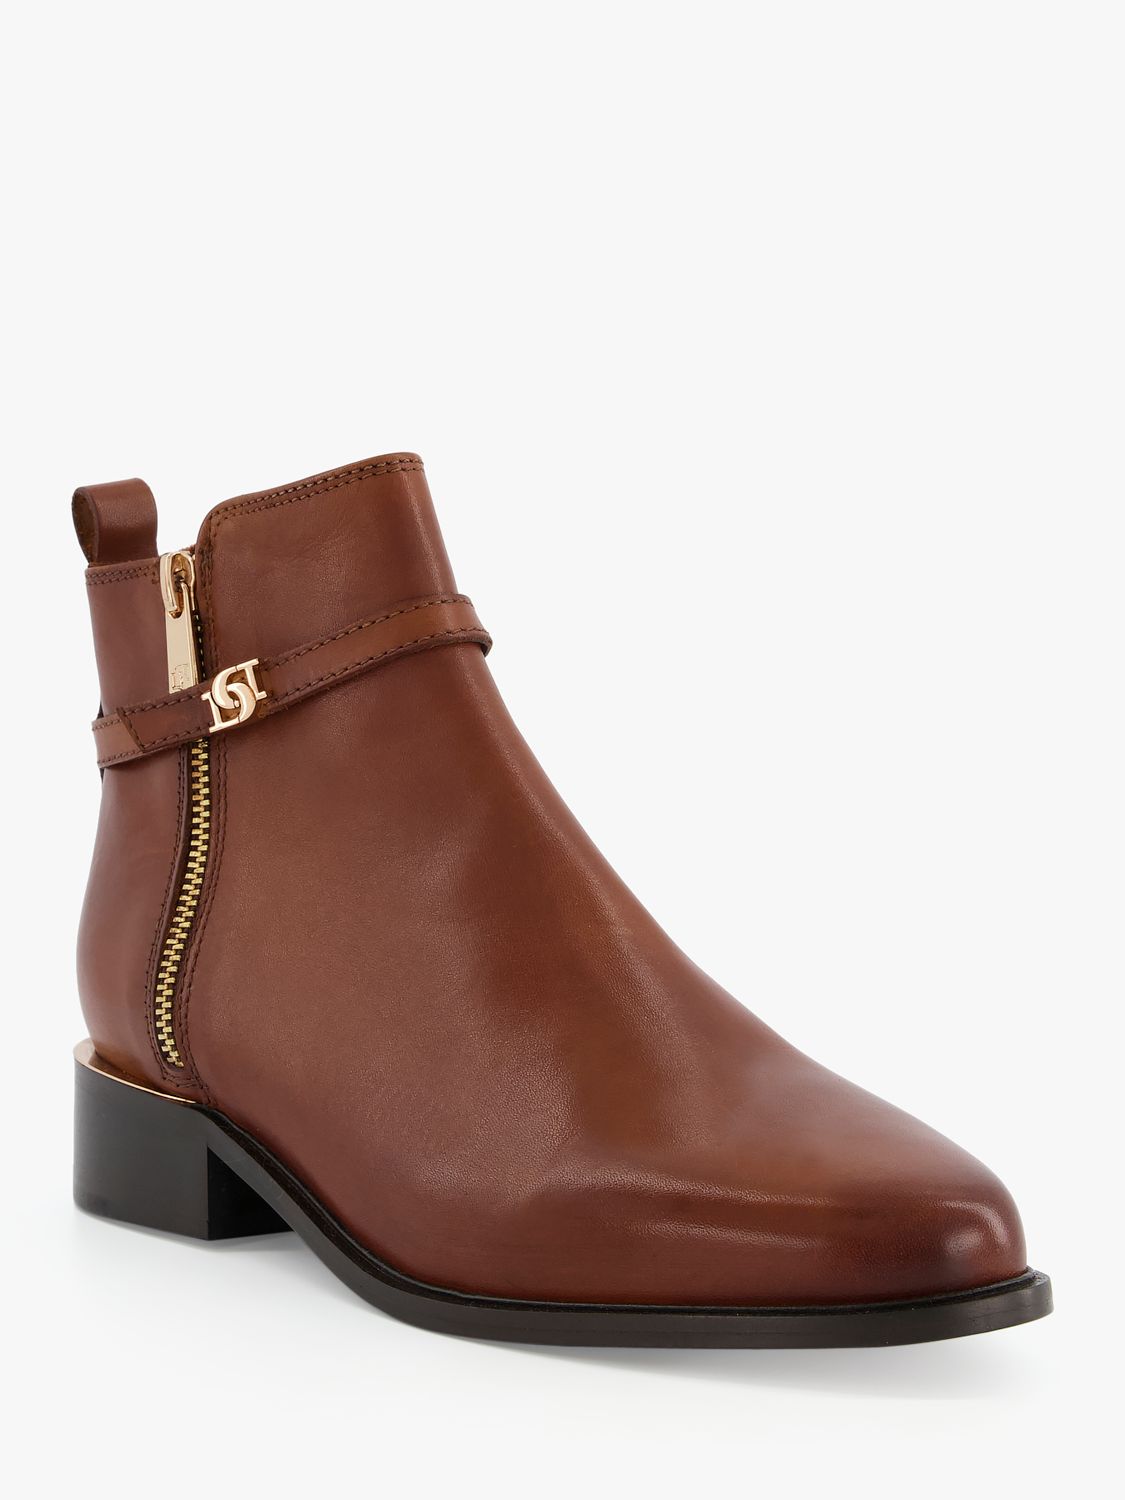 Buy Dune Wide Fit Pap Leather Ankle Boots Online at johnlewis.com